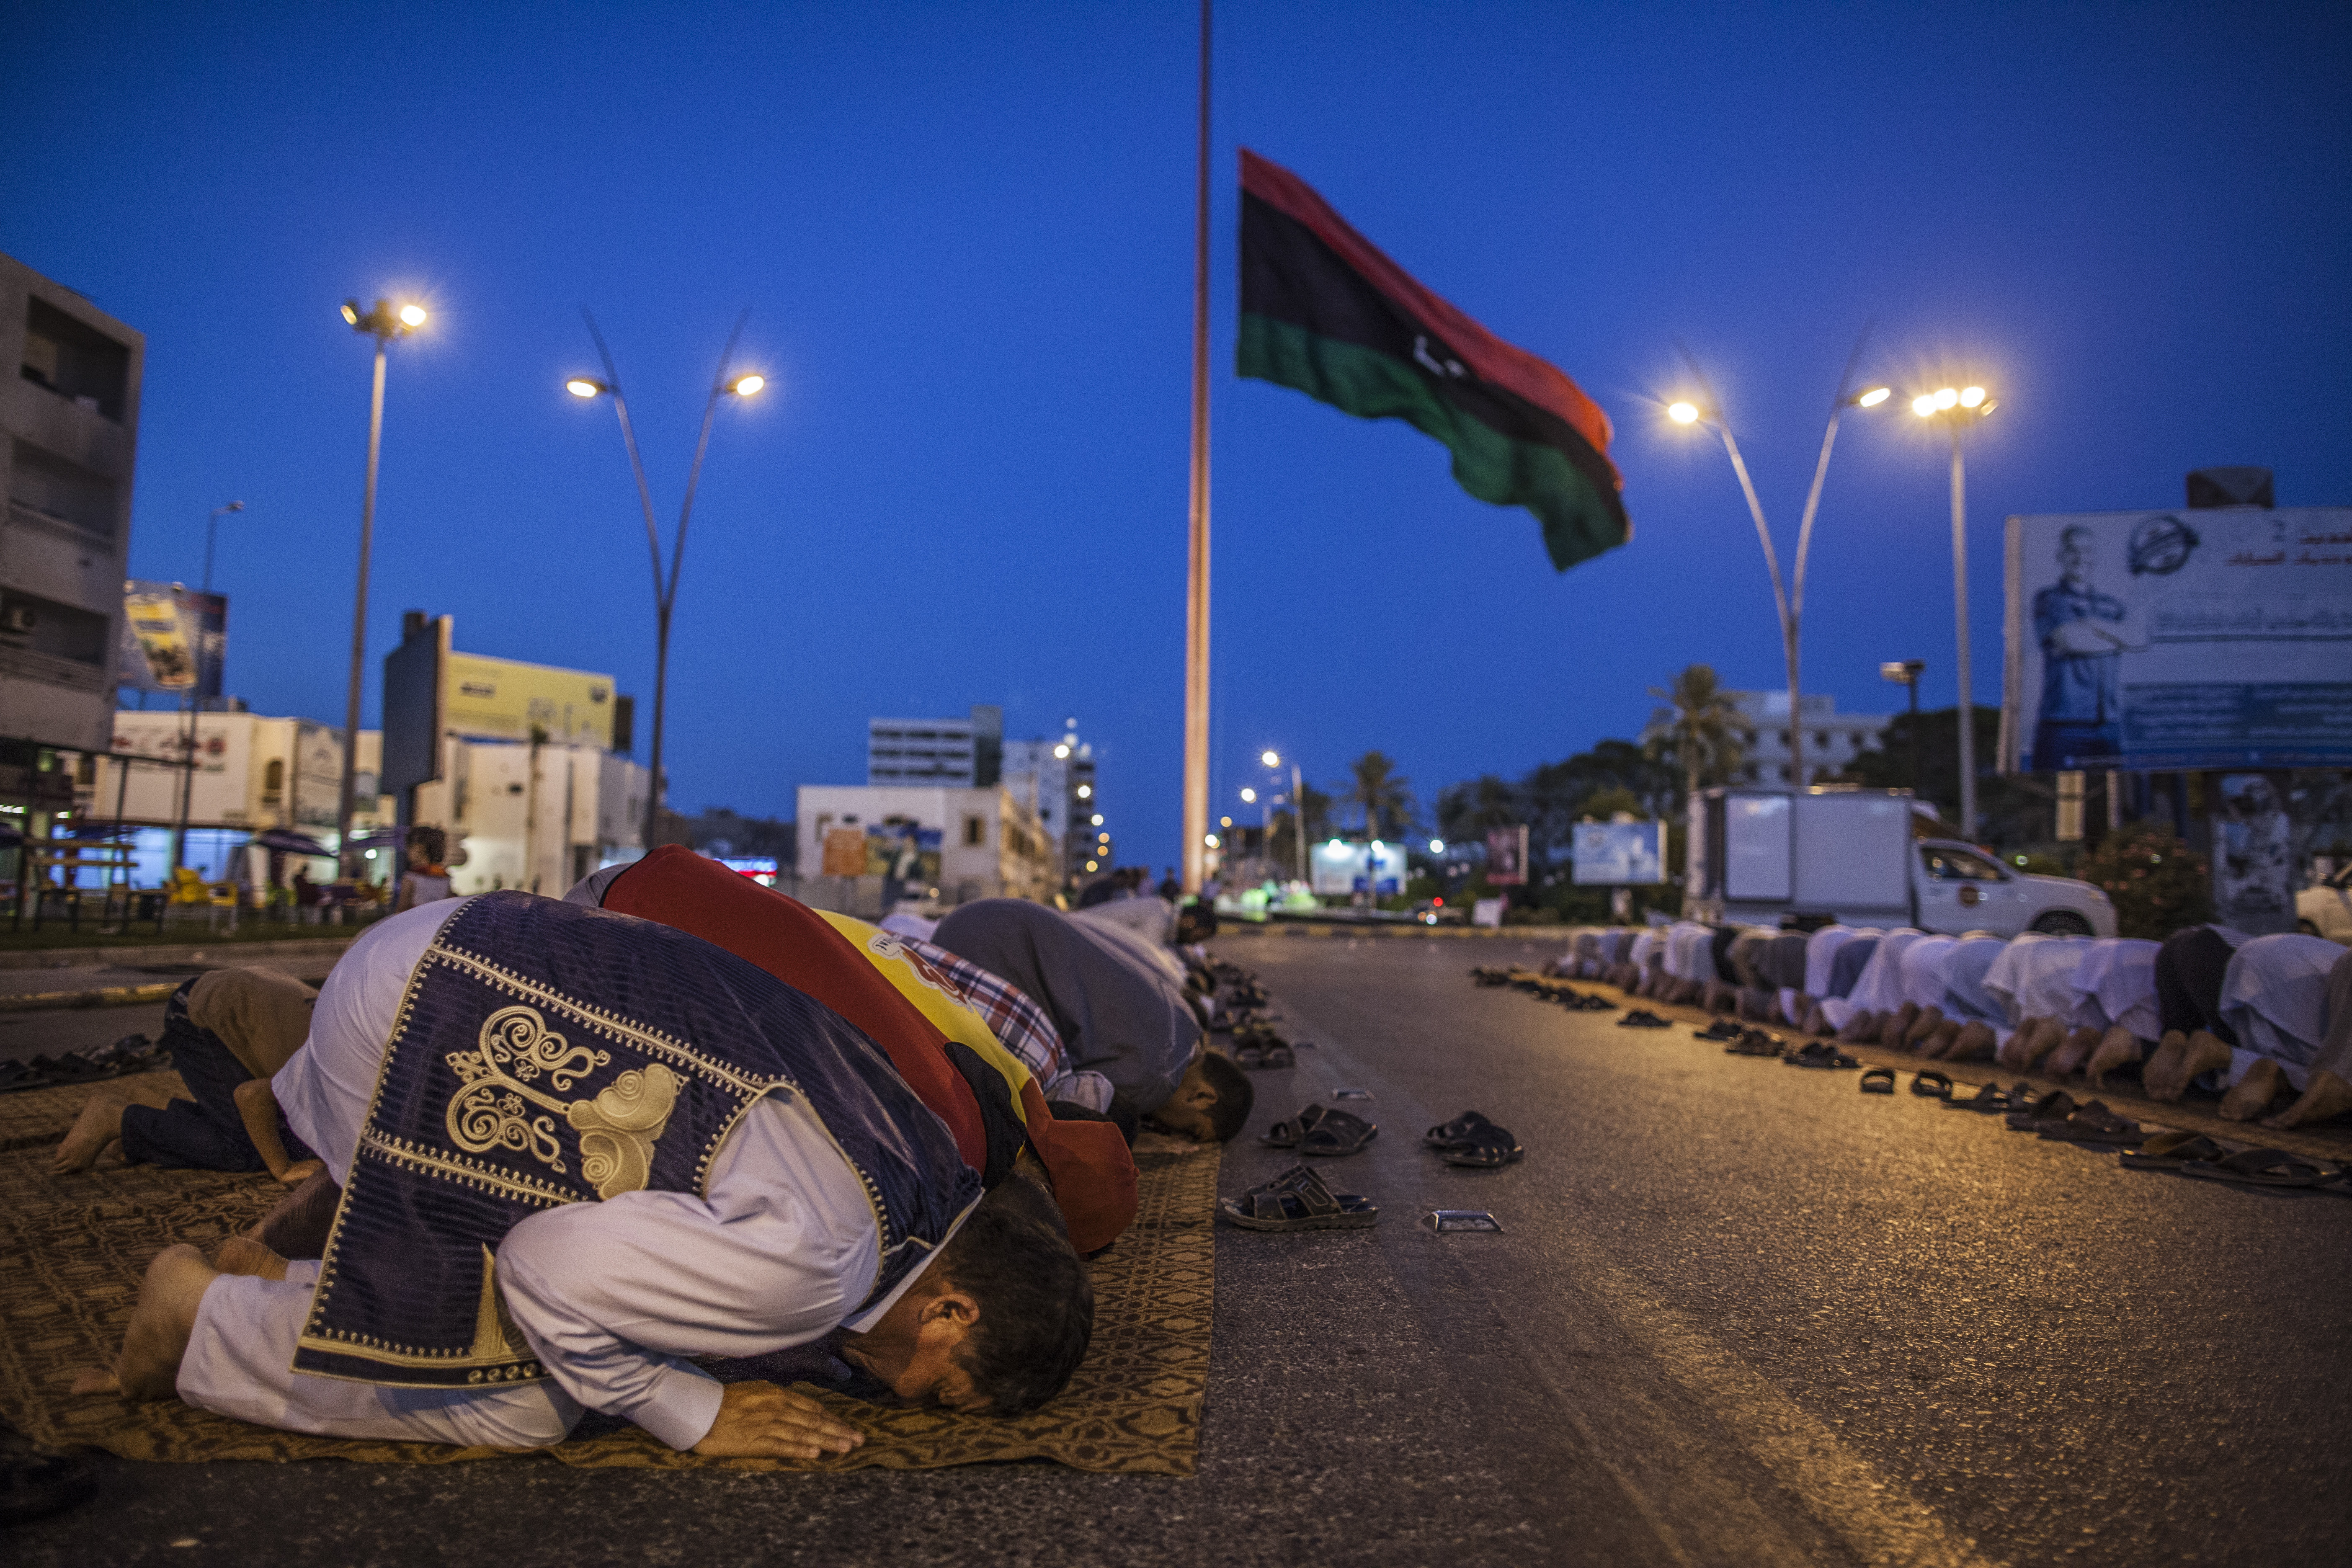 Dozens of residents in Misurata pray after attending a protest organized to voice their discontent with what they perceive is Gen. Khalifa Hifter's alliance with Egypt's government [photo credit: Javier Manzano/For The Washington Post]